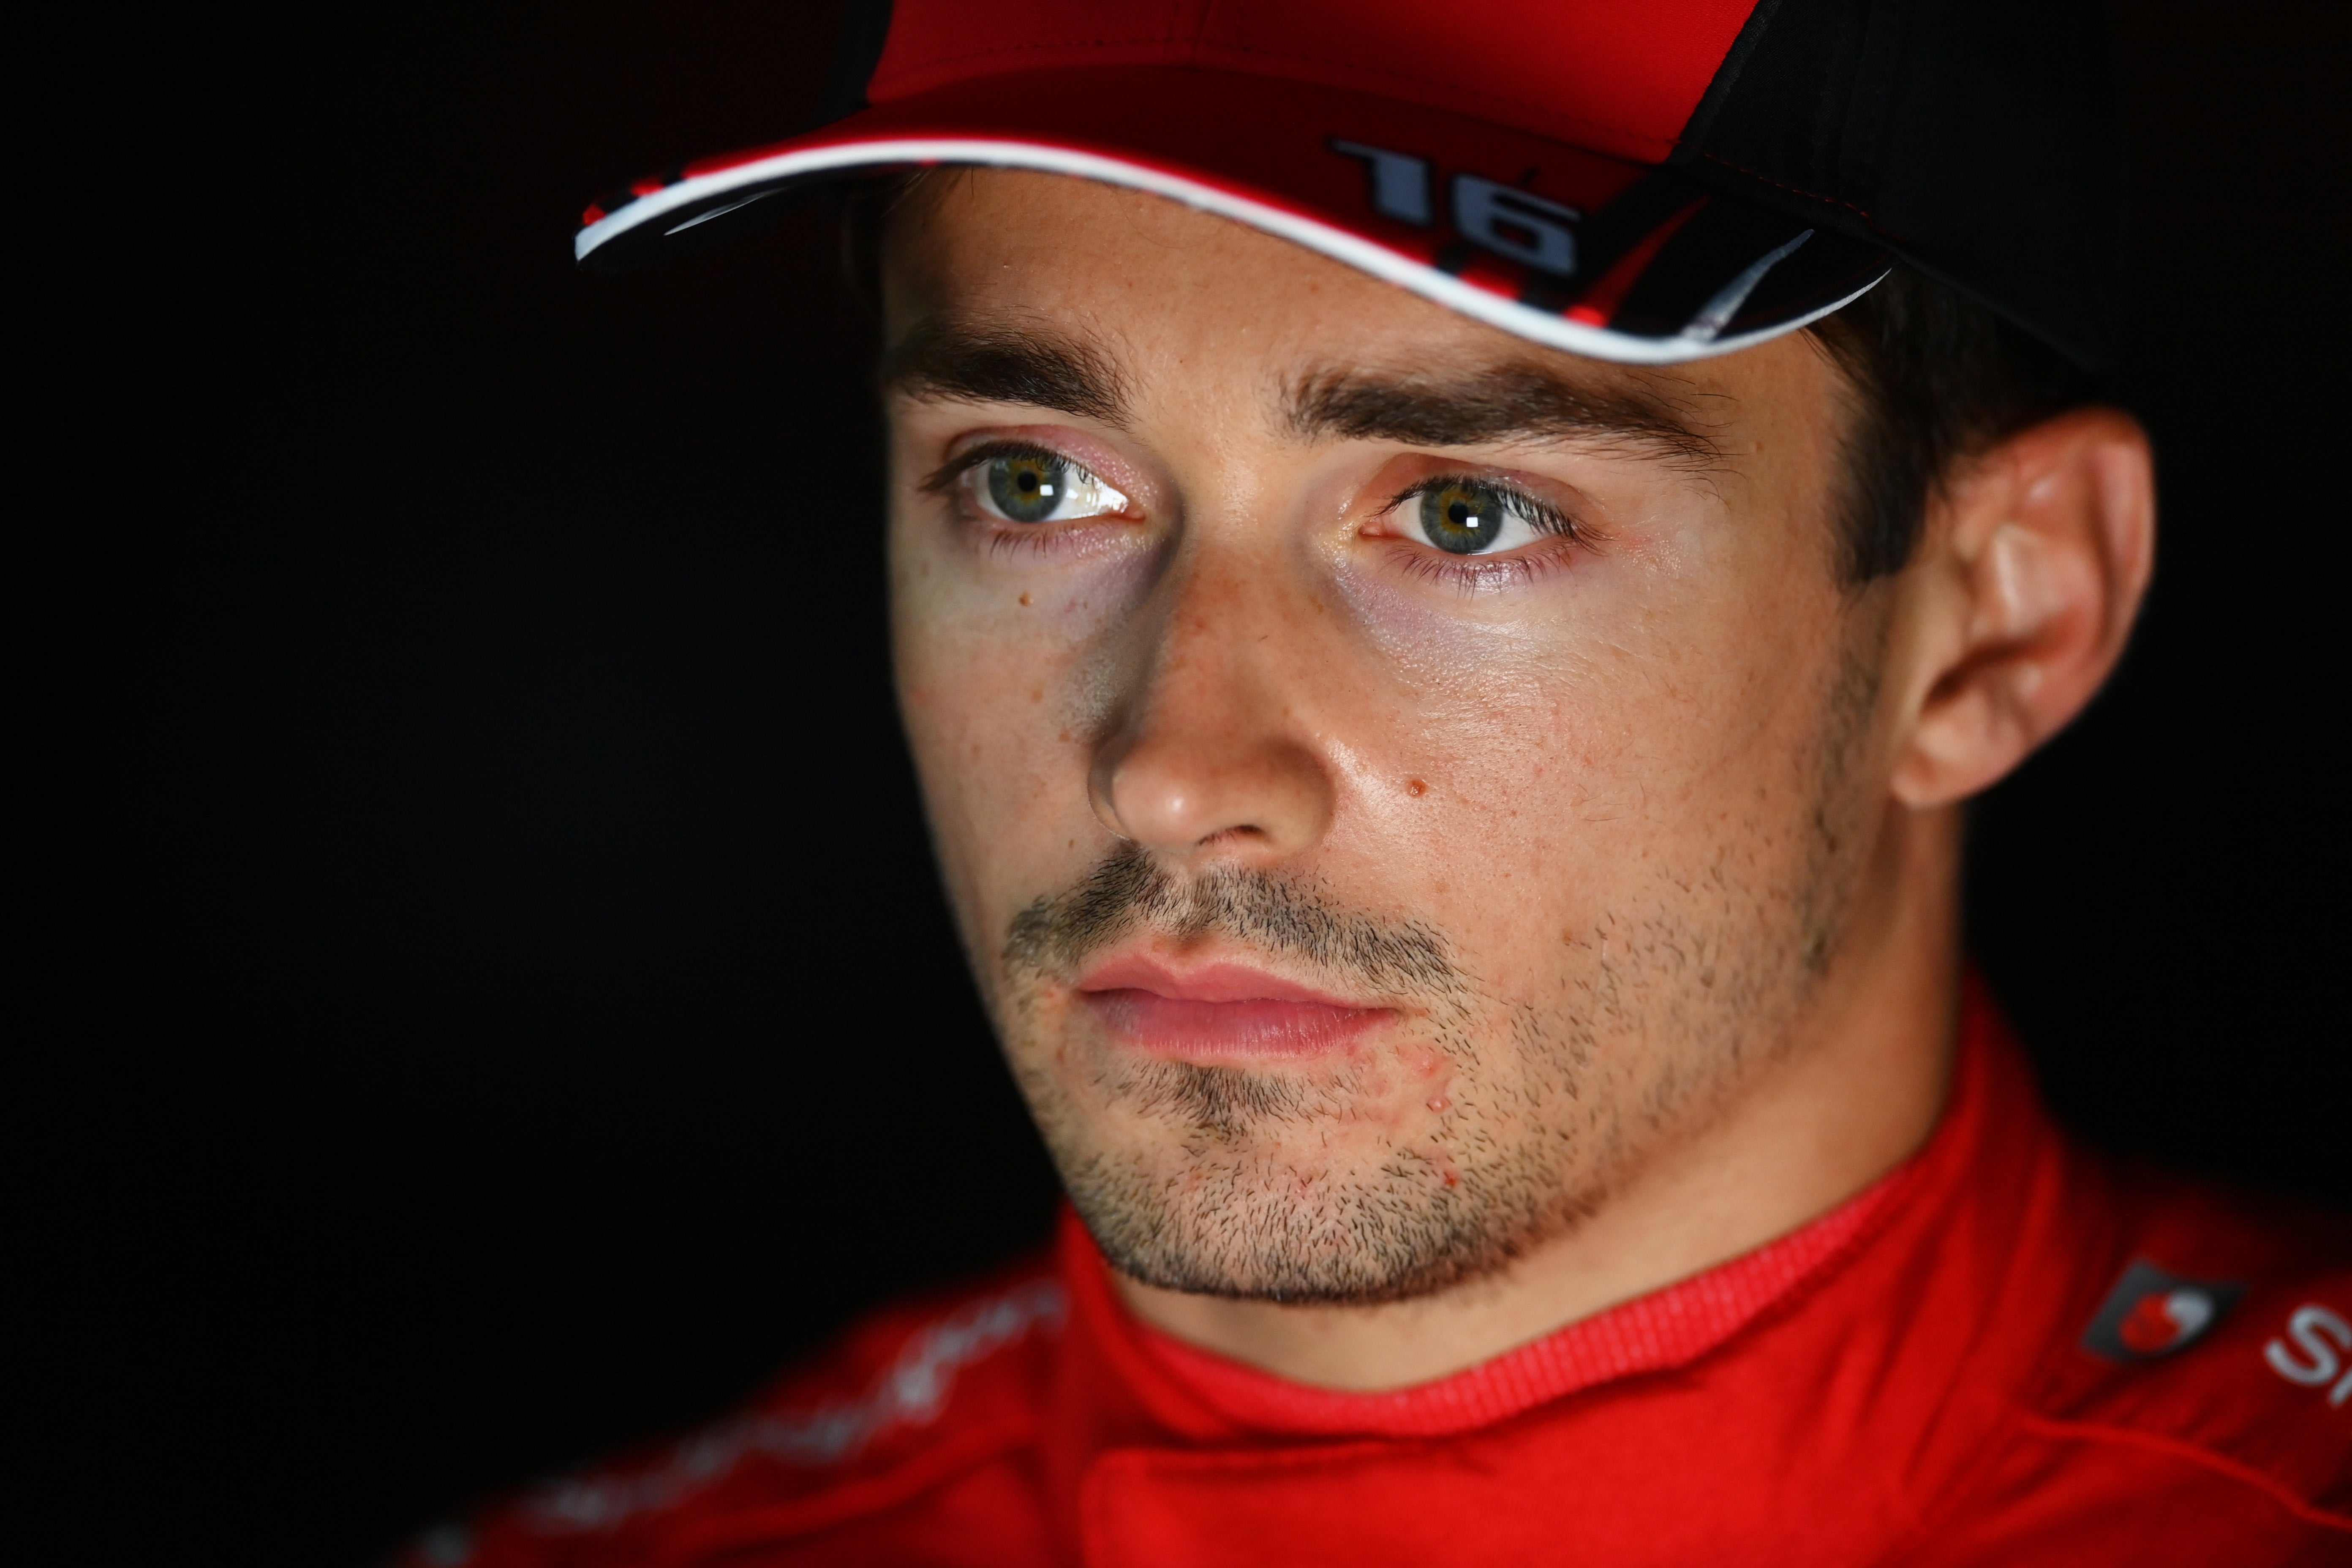 Charles Leclerc’s season has been hampered by a faltering car